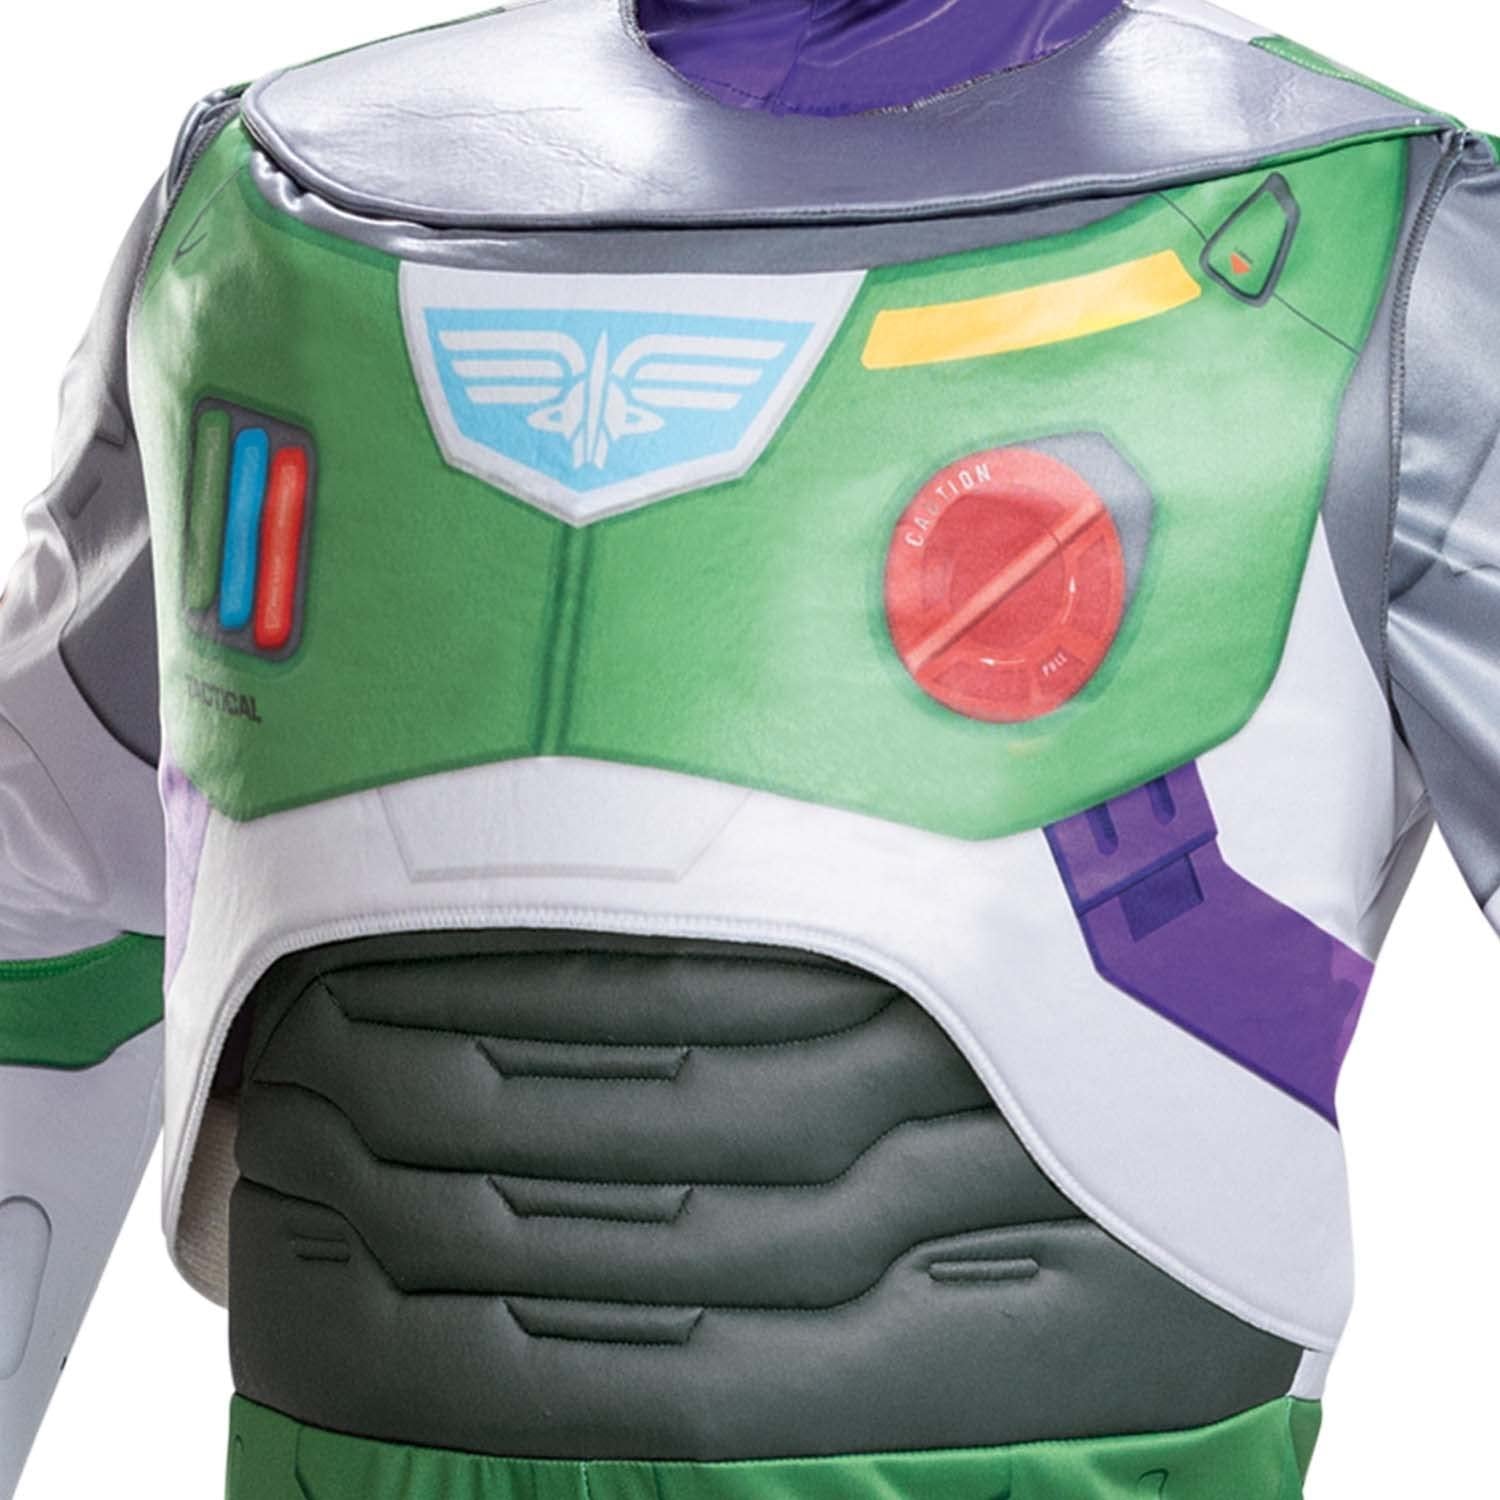 Disguise mens Disney Pixar Lightyear Buzz Space Ranger Costume, Official Disney Lightyear Outfit Adult Sized Costumes, As Shown, Men s Size Medium 38-40 US